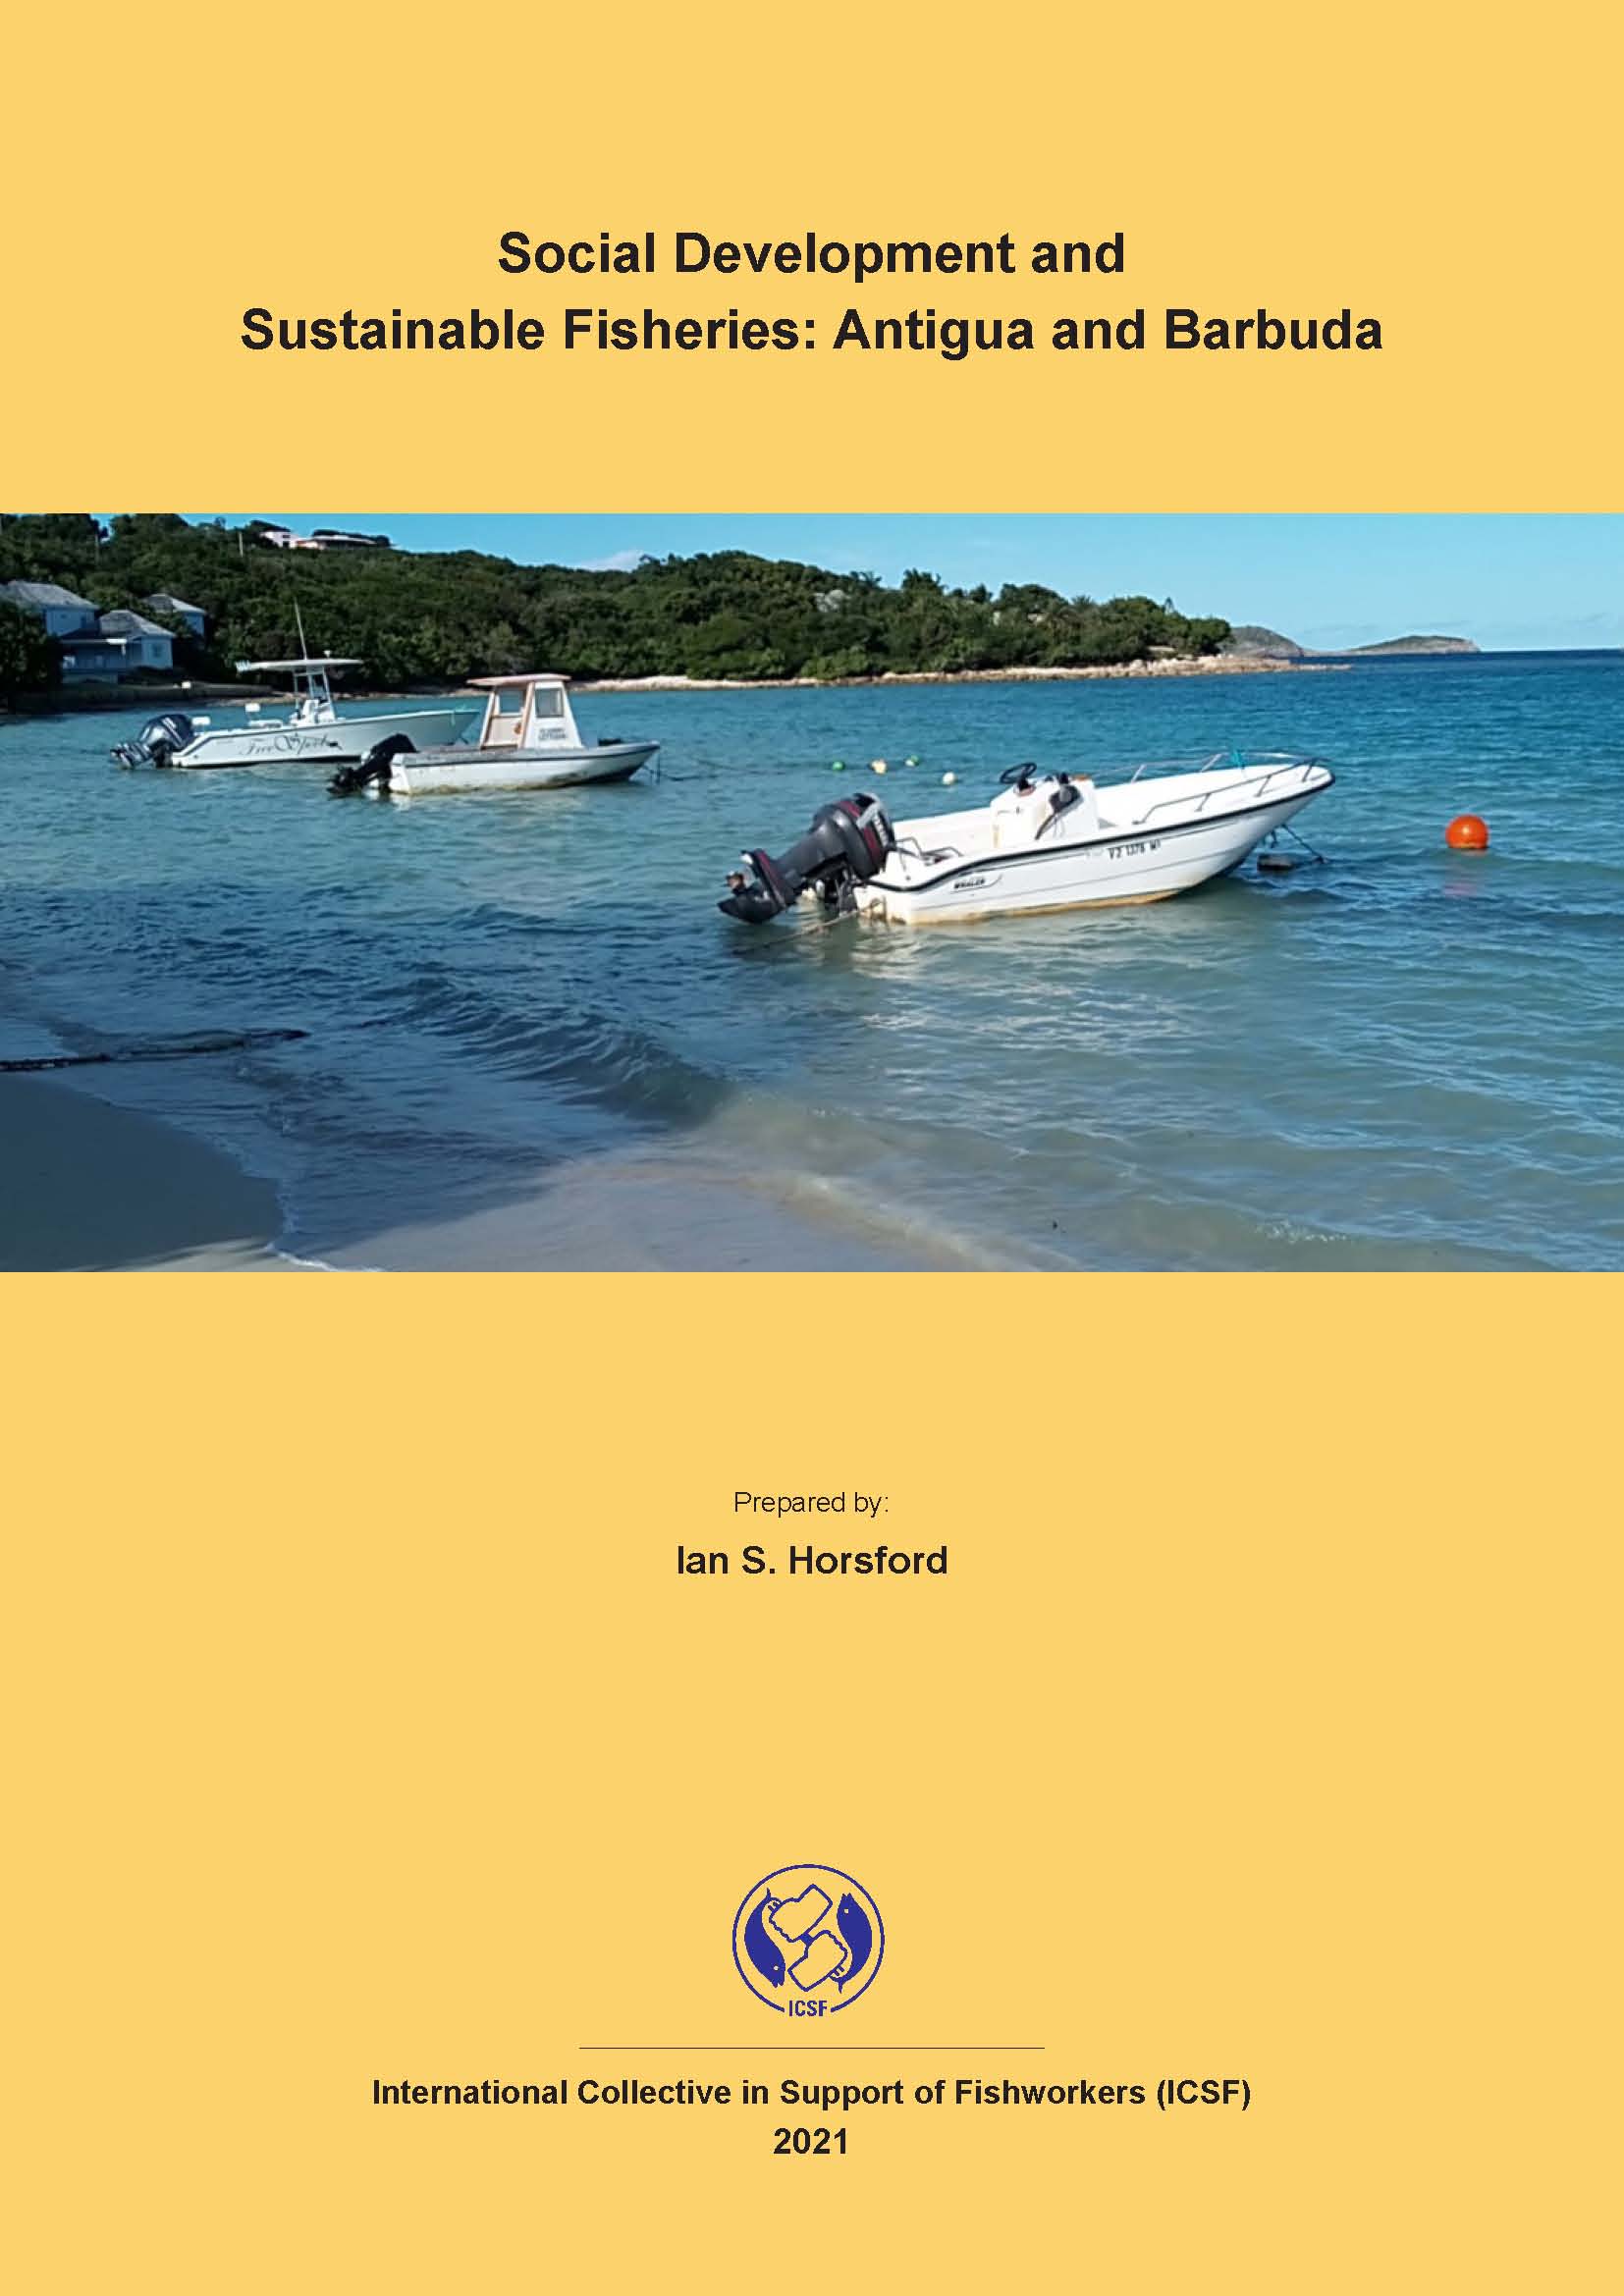 Social Development and Sustainable Fisheries: Antigua and Barbuda by Ian S. Horsford